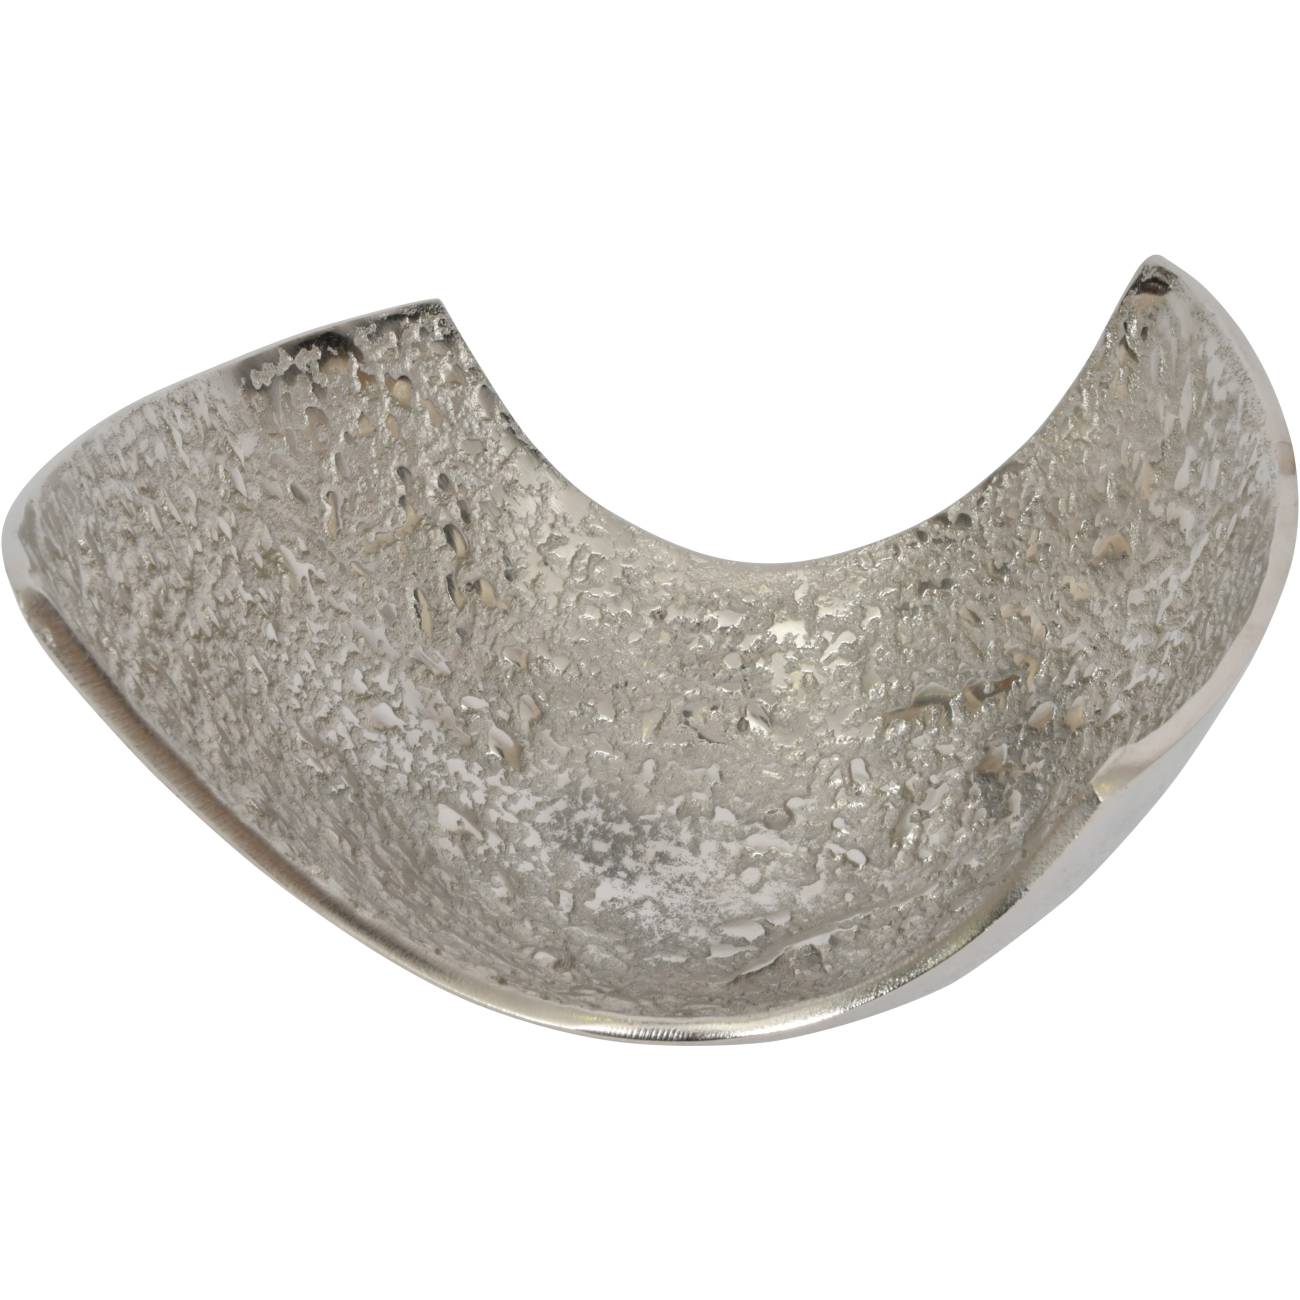 Silver Peel Bowl - small and large sizes